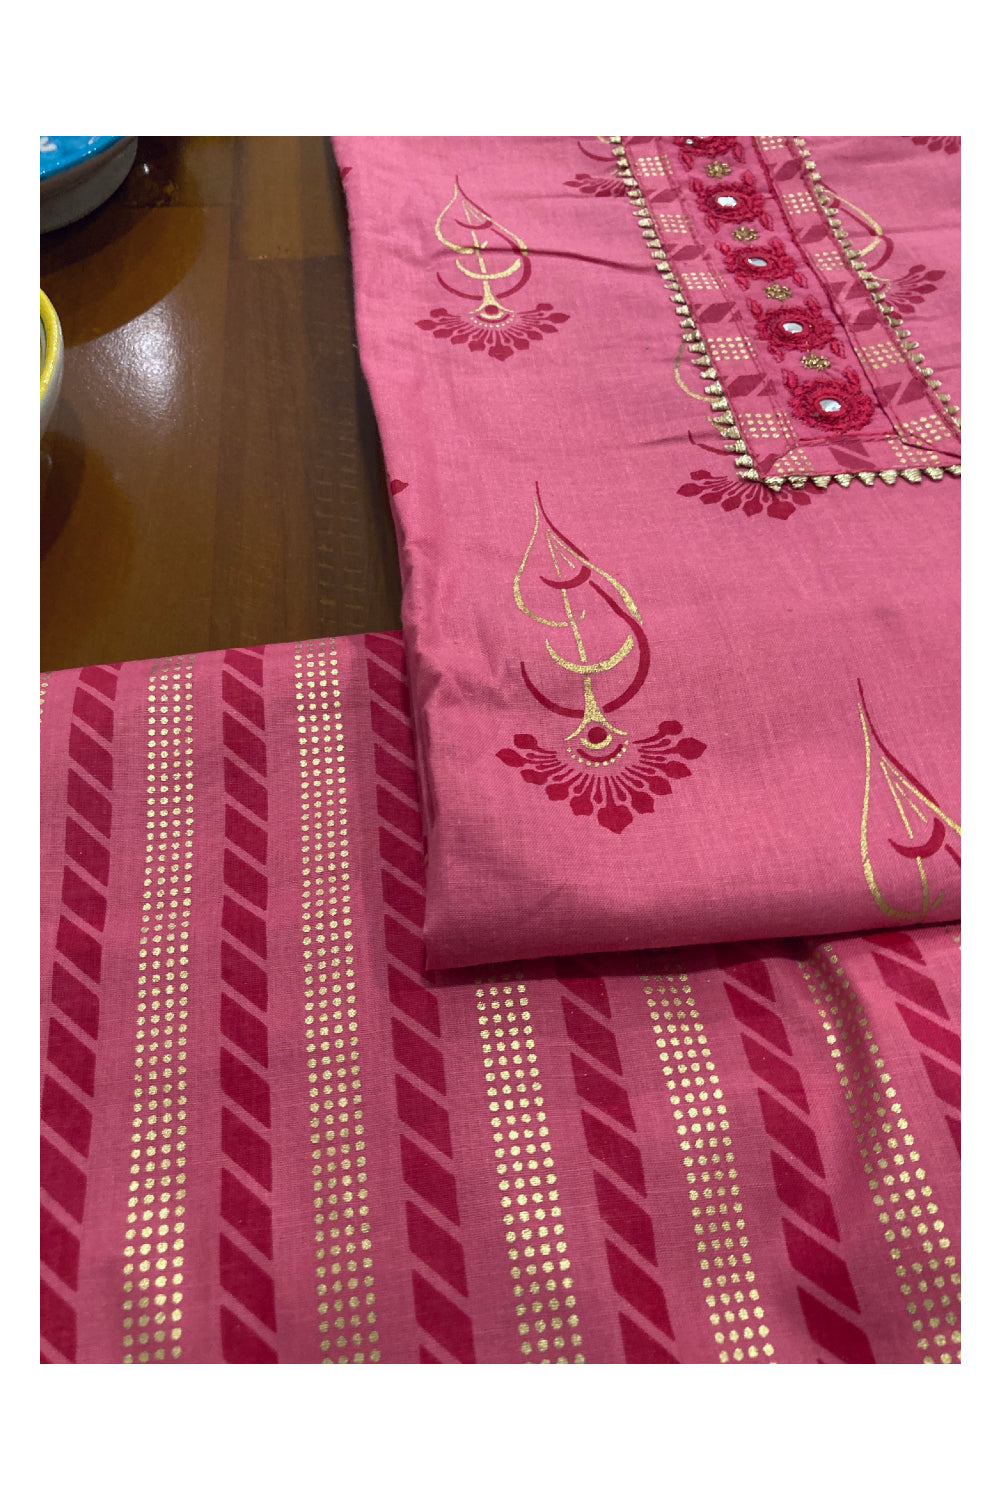 Southloom™ Soft Cotton Churidar Salwar Suit Material in Rose Colour with Prints